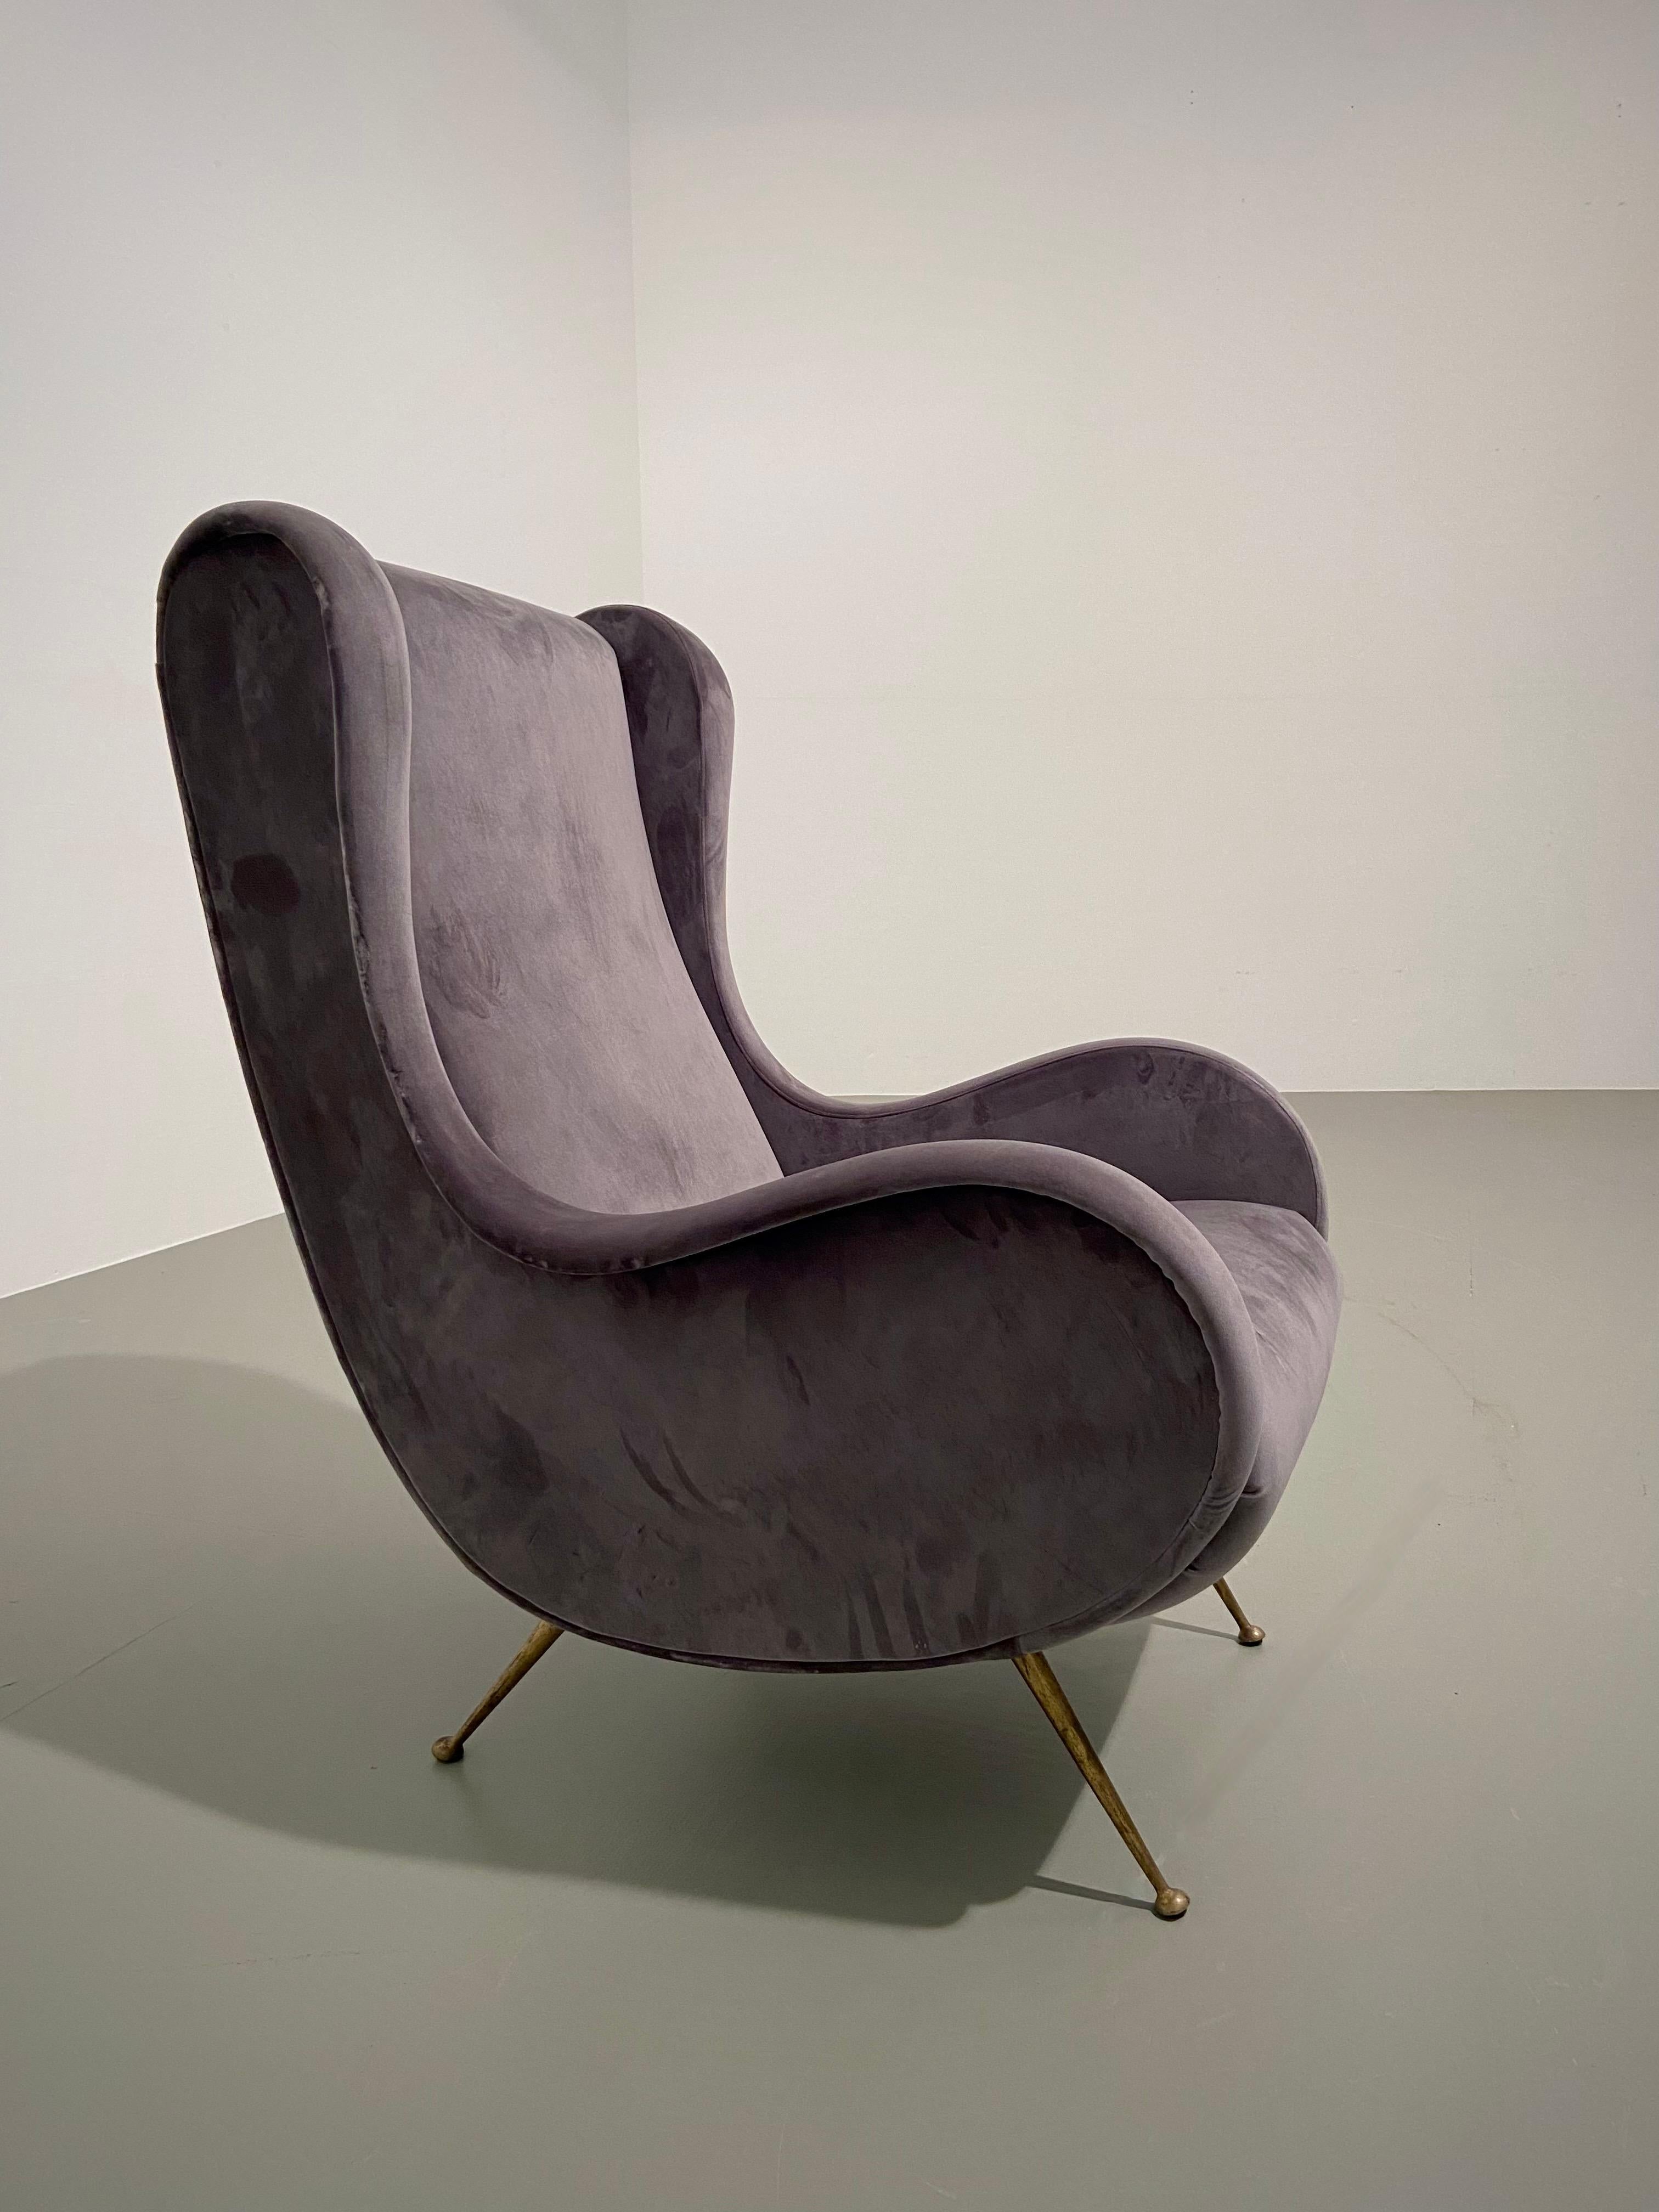 A recently reupholstered lounge chair with long brass legs. Great curves and shapes and the colour of the recent upholstery is grey / blue. The chair very much resembles the 'Bergere' chair by Gio Ponti and the legs clearly show that it's from that